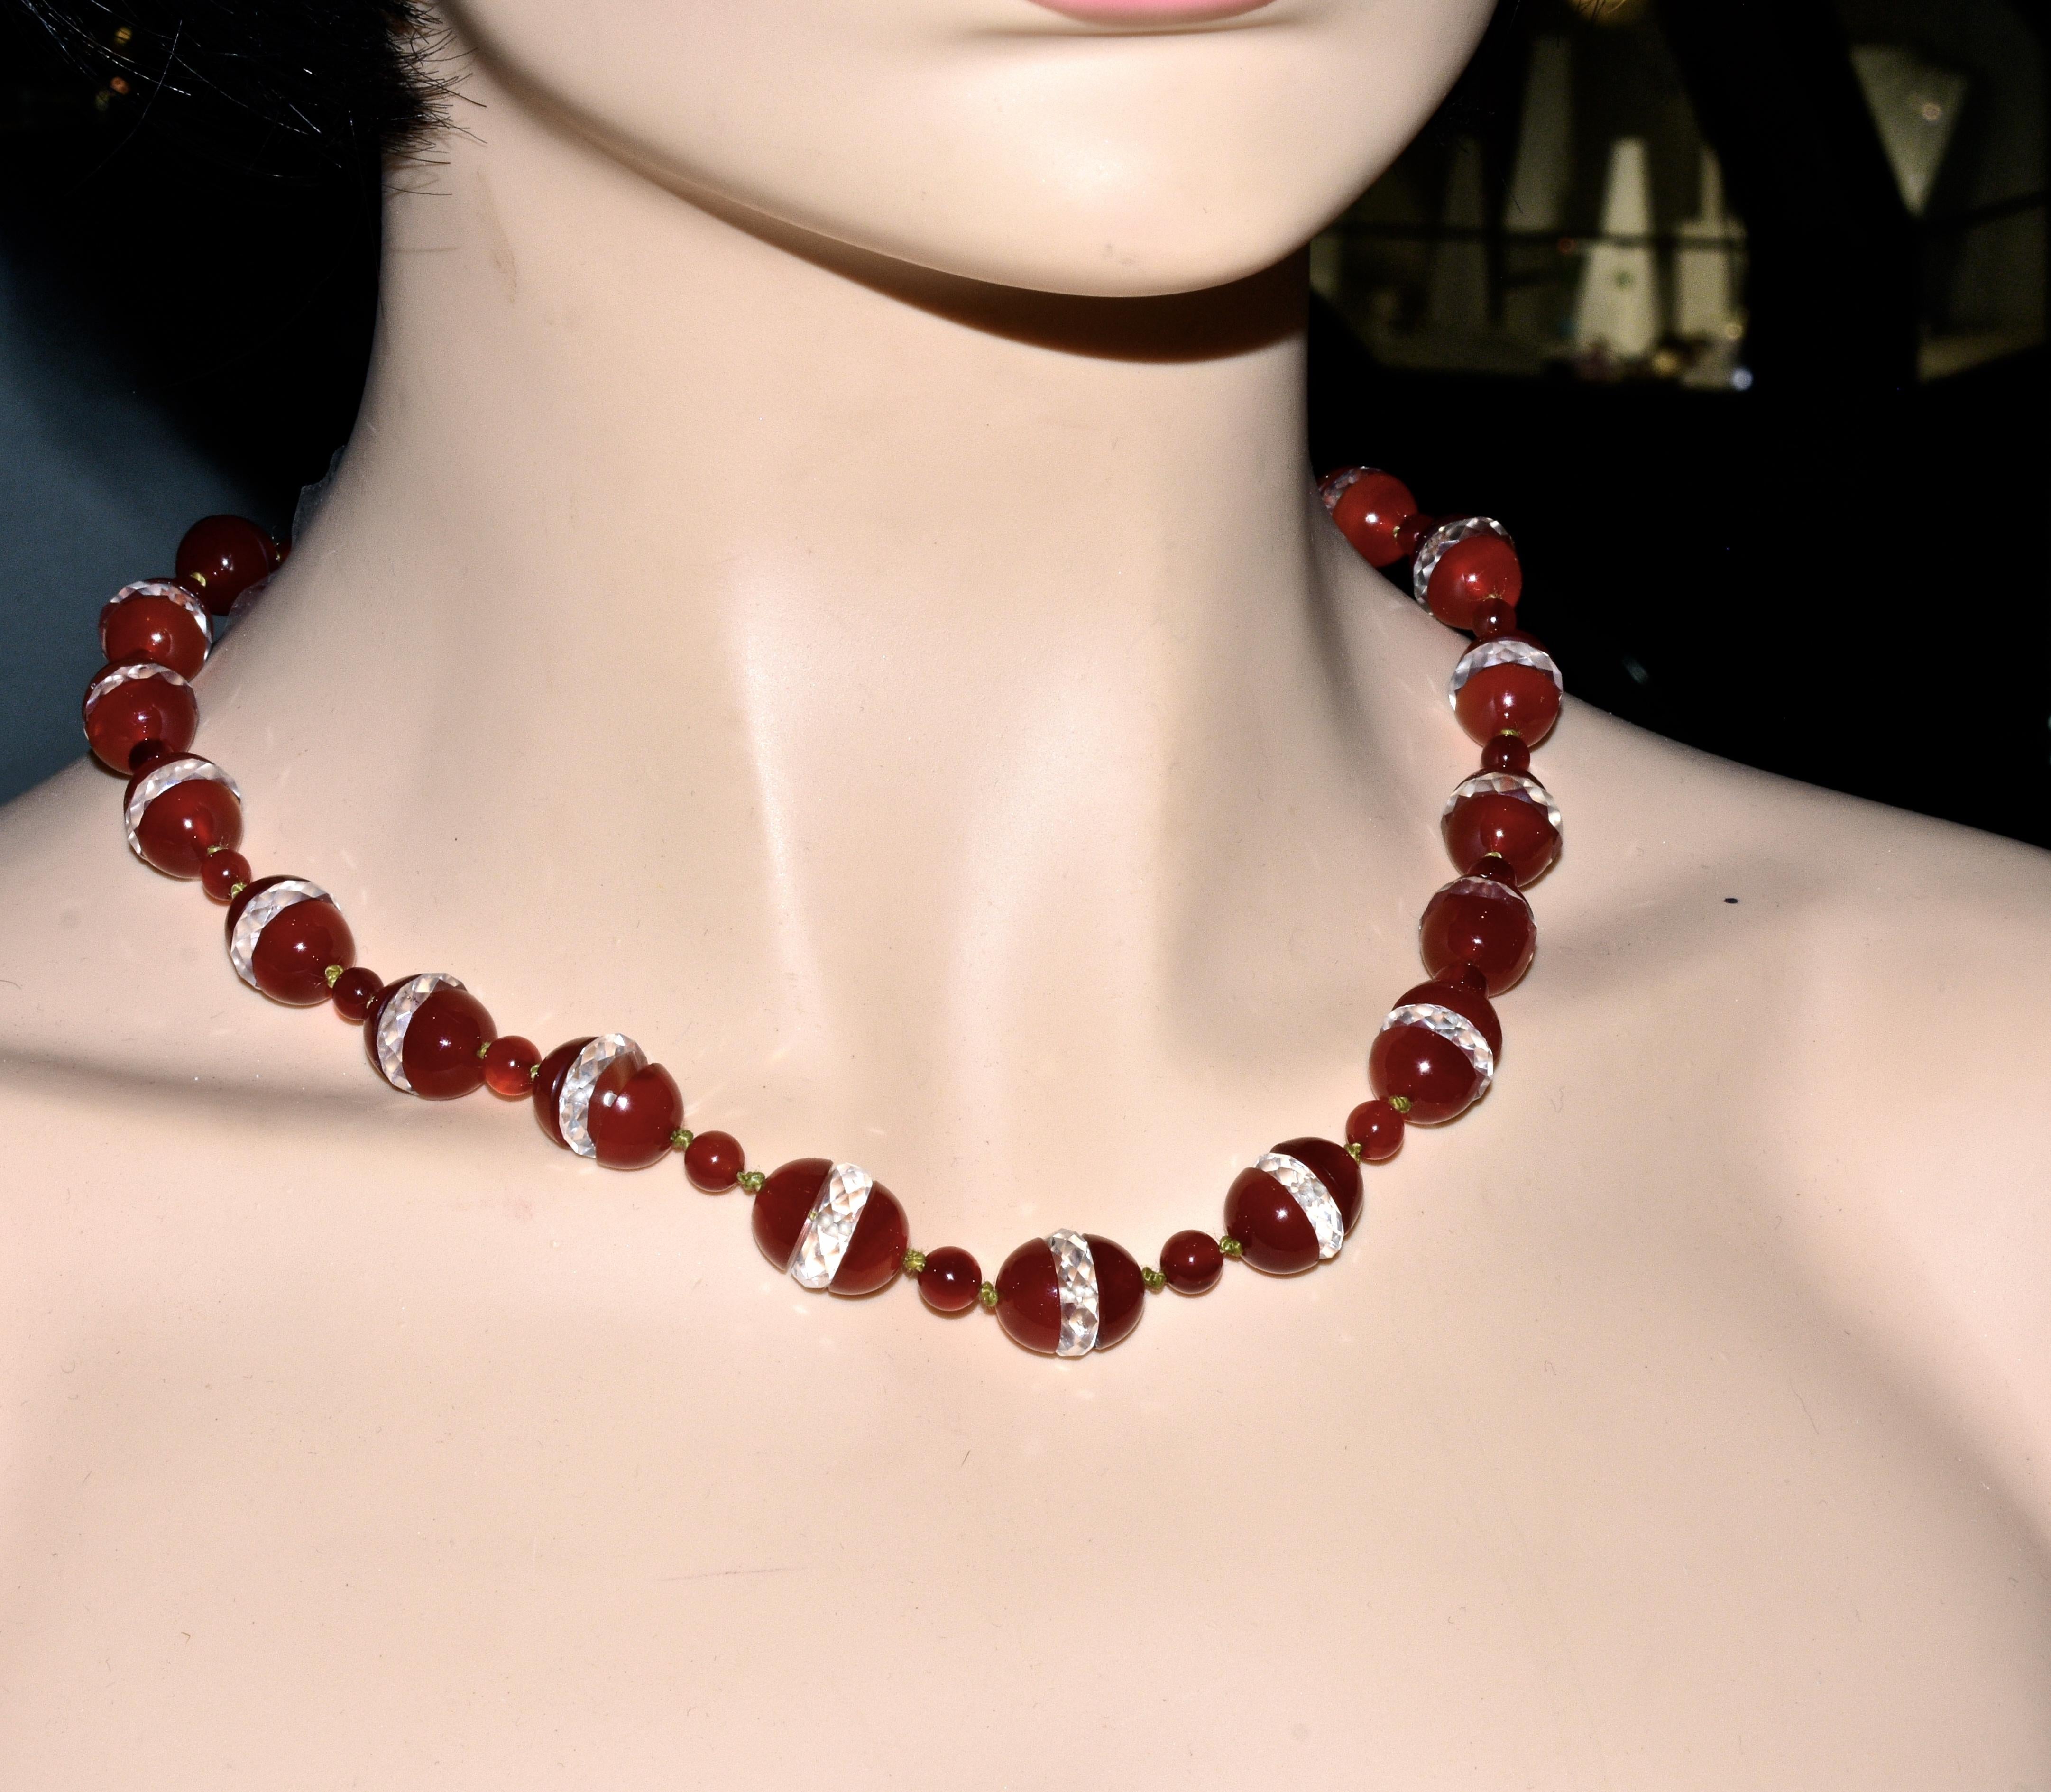 Art Deco Agate and Rock Crystal Necklace, circa 1925